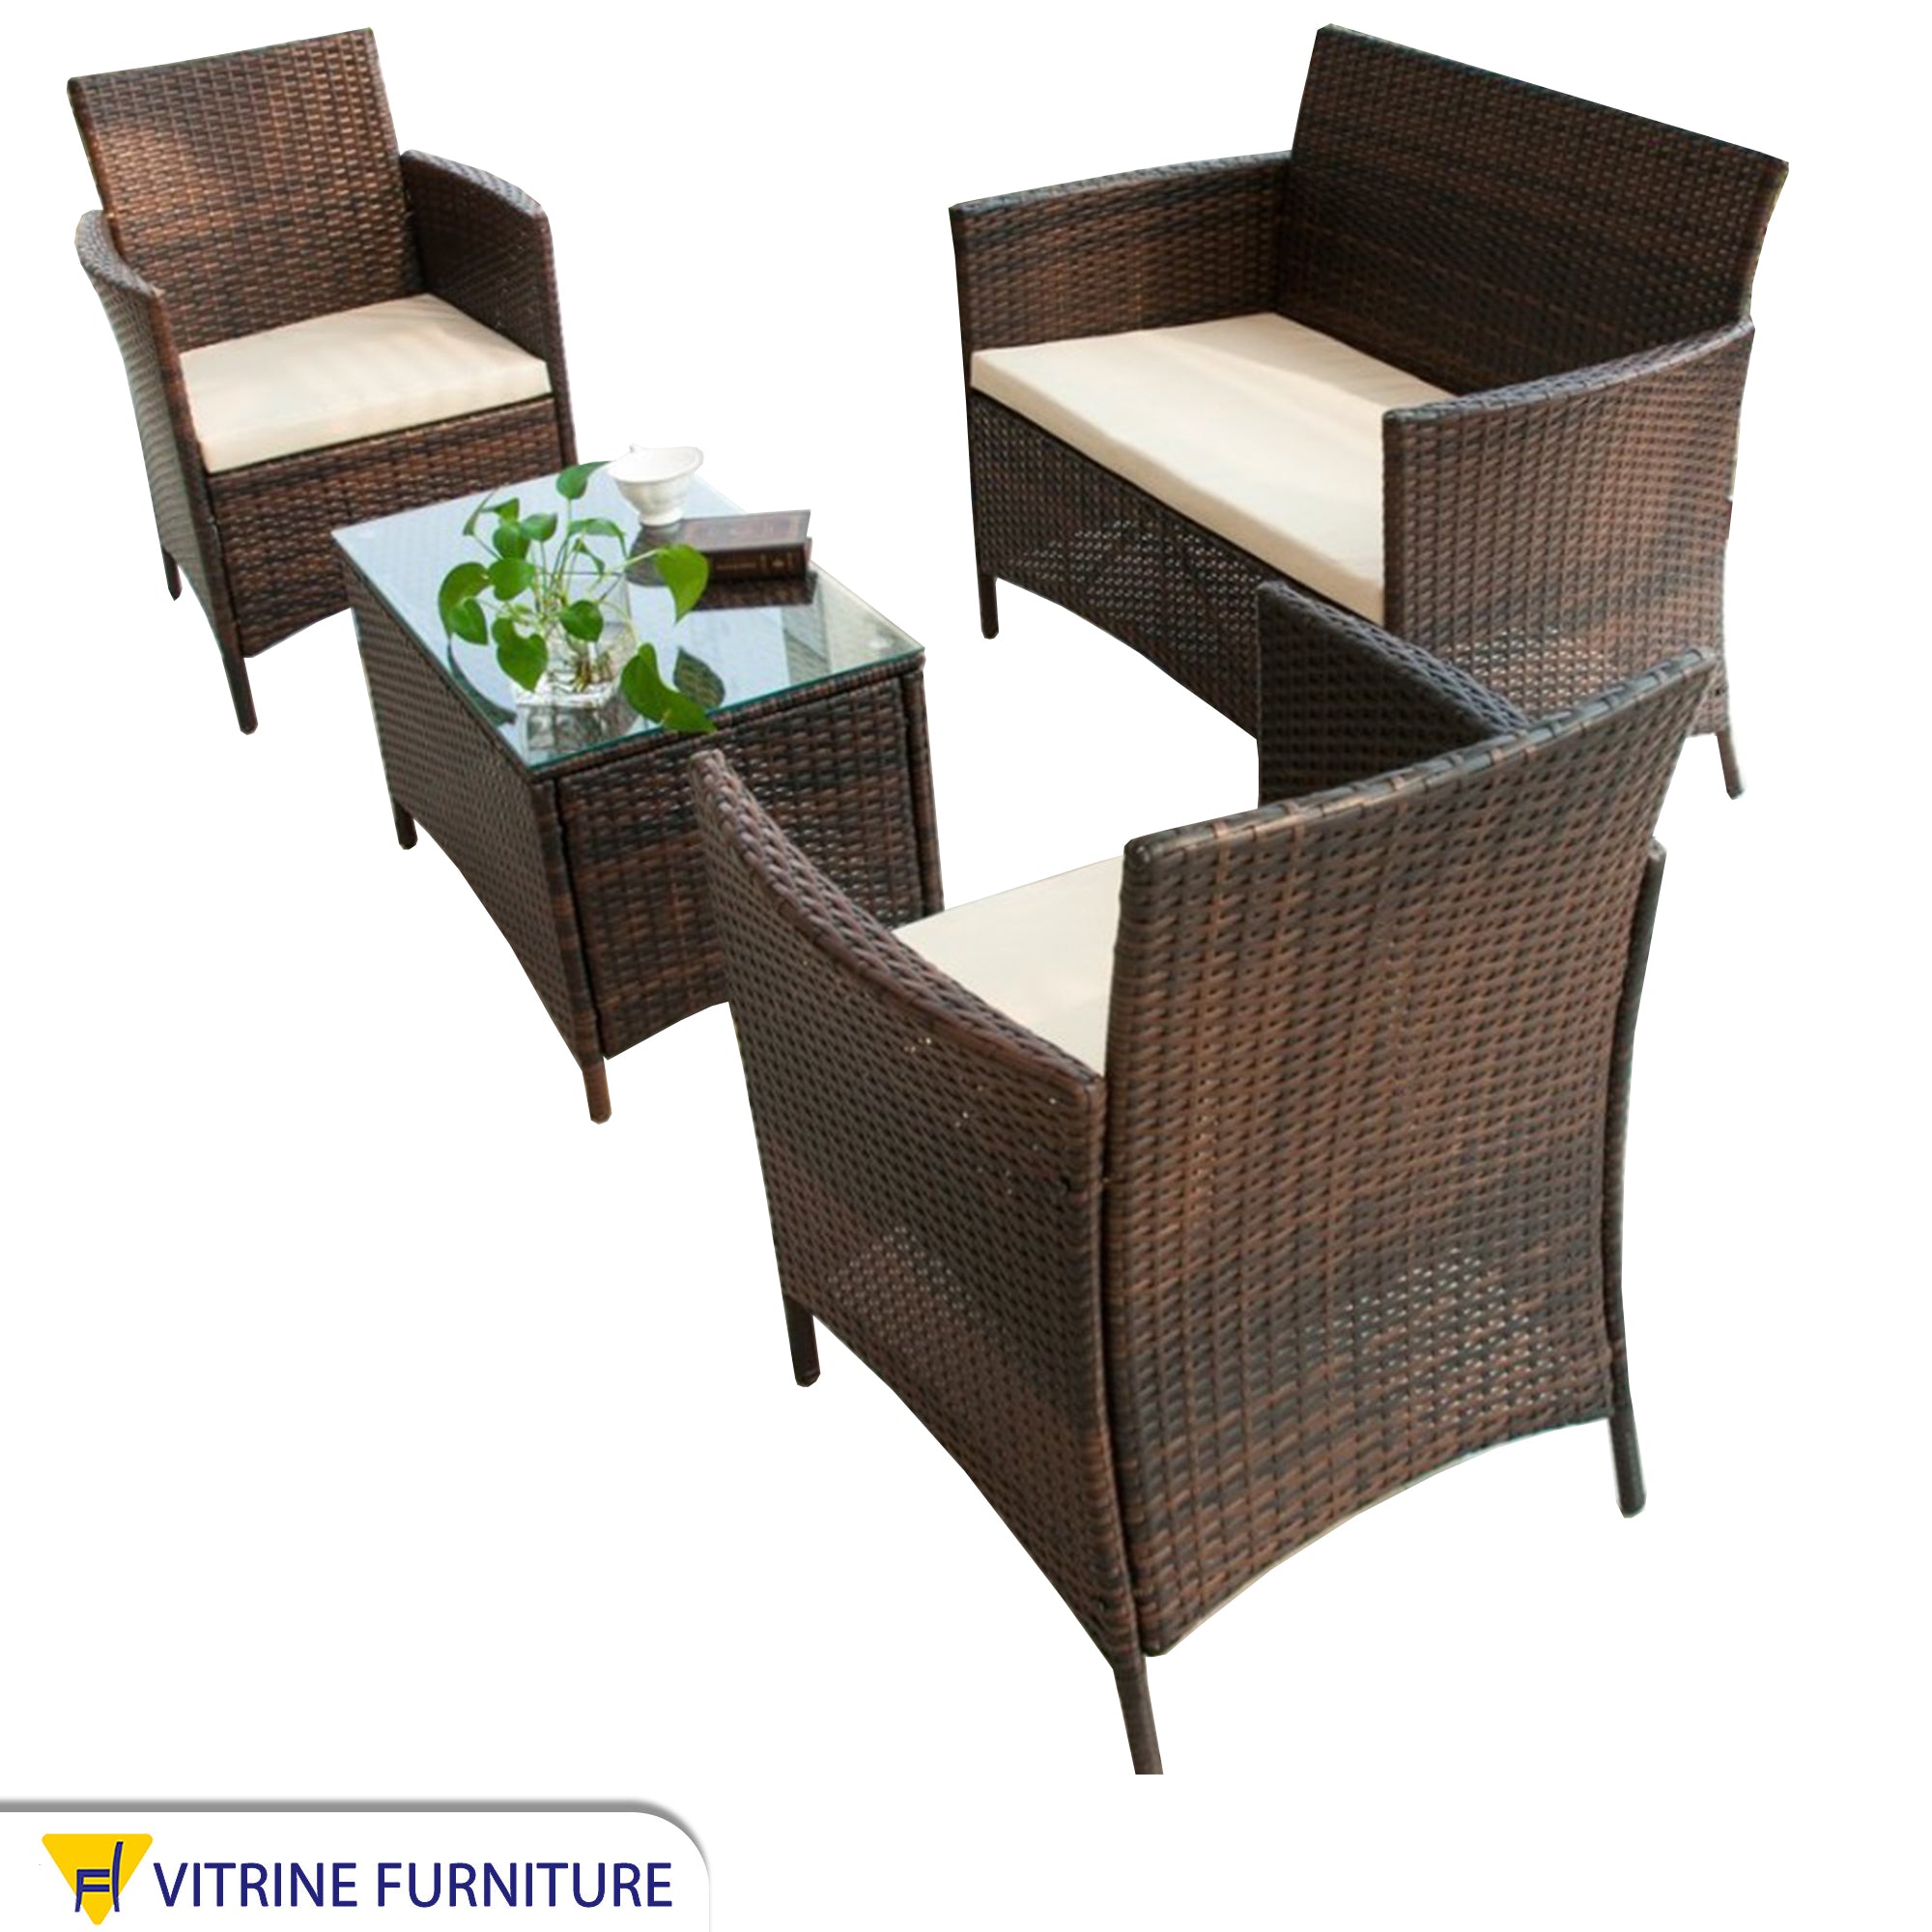 Rattan sofa and chairs for the garden